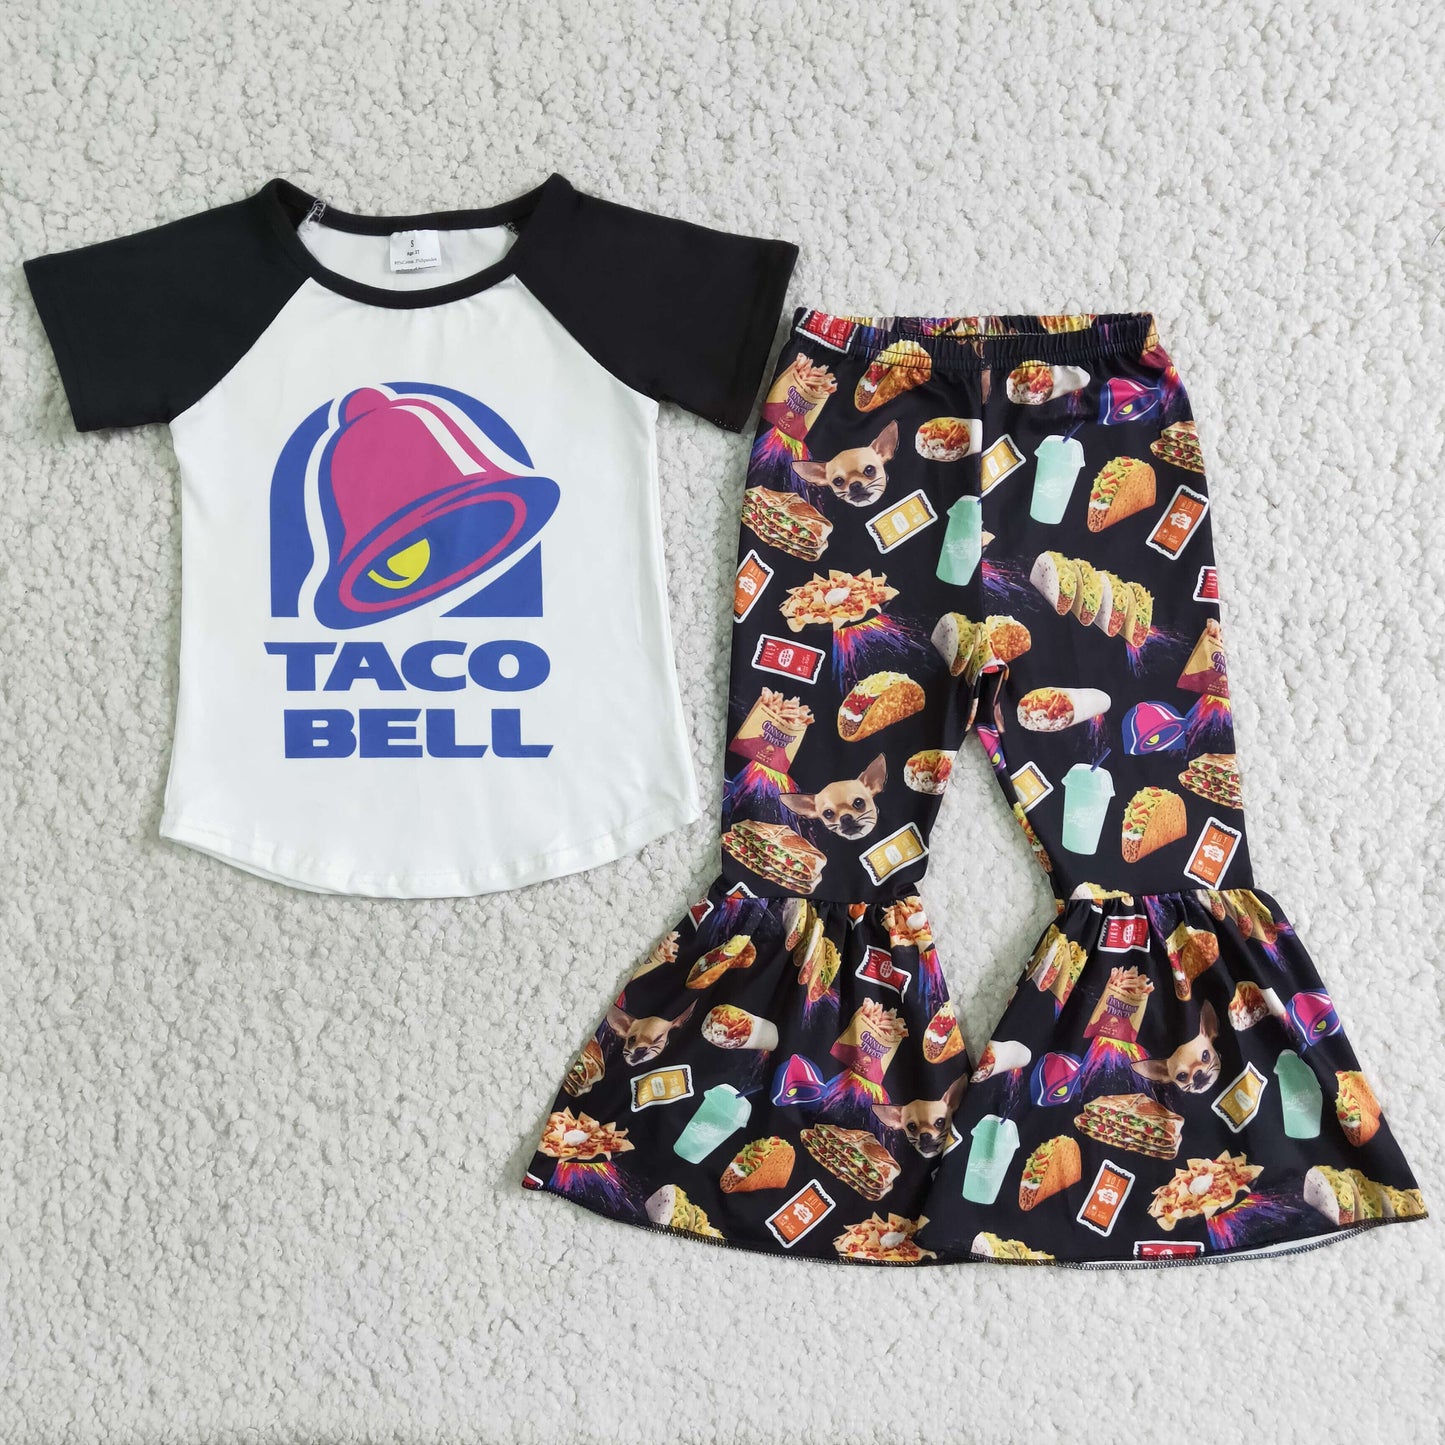 Taco Bell  outfits